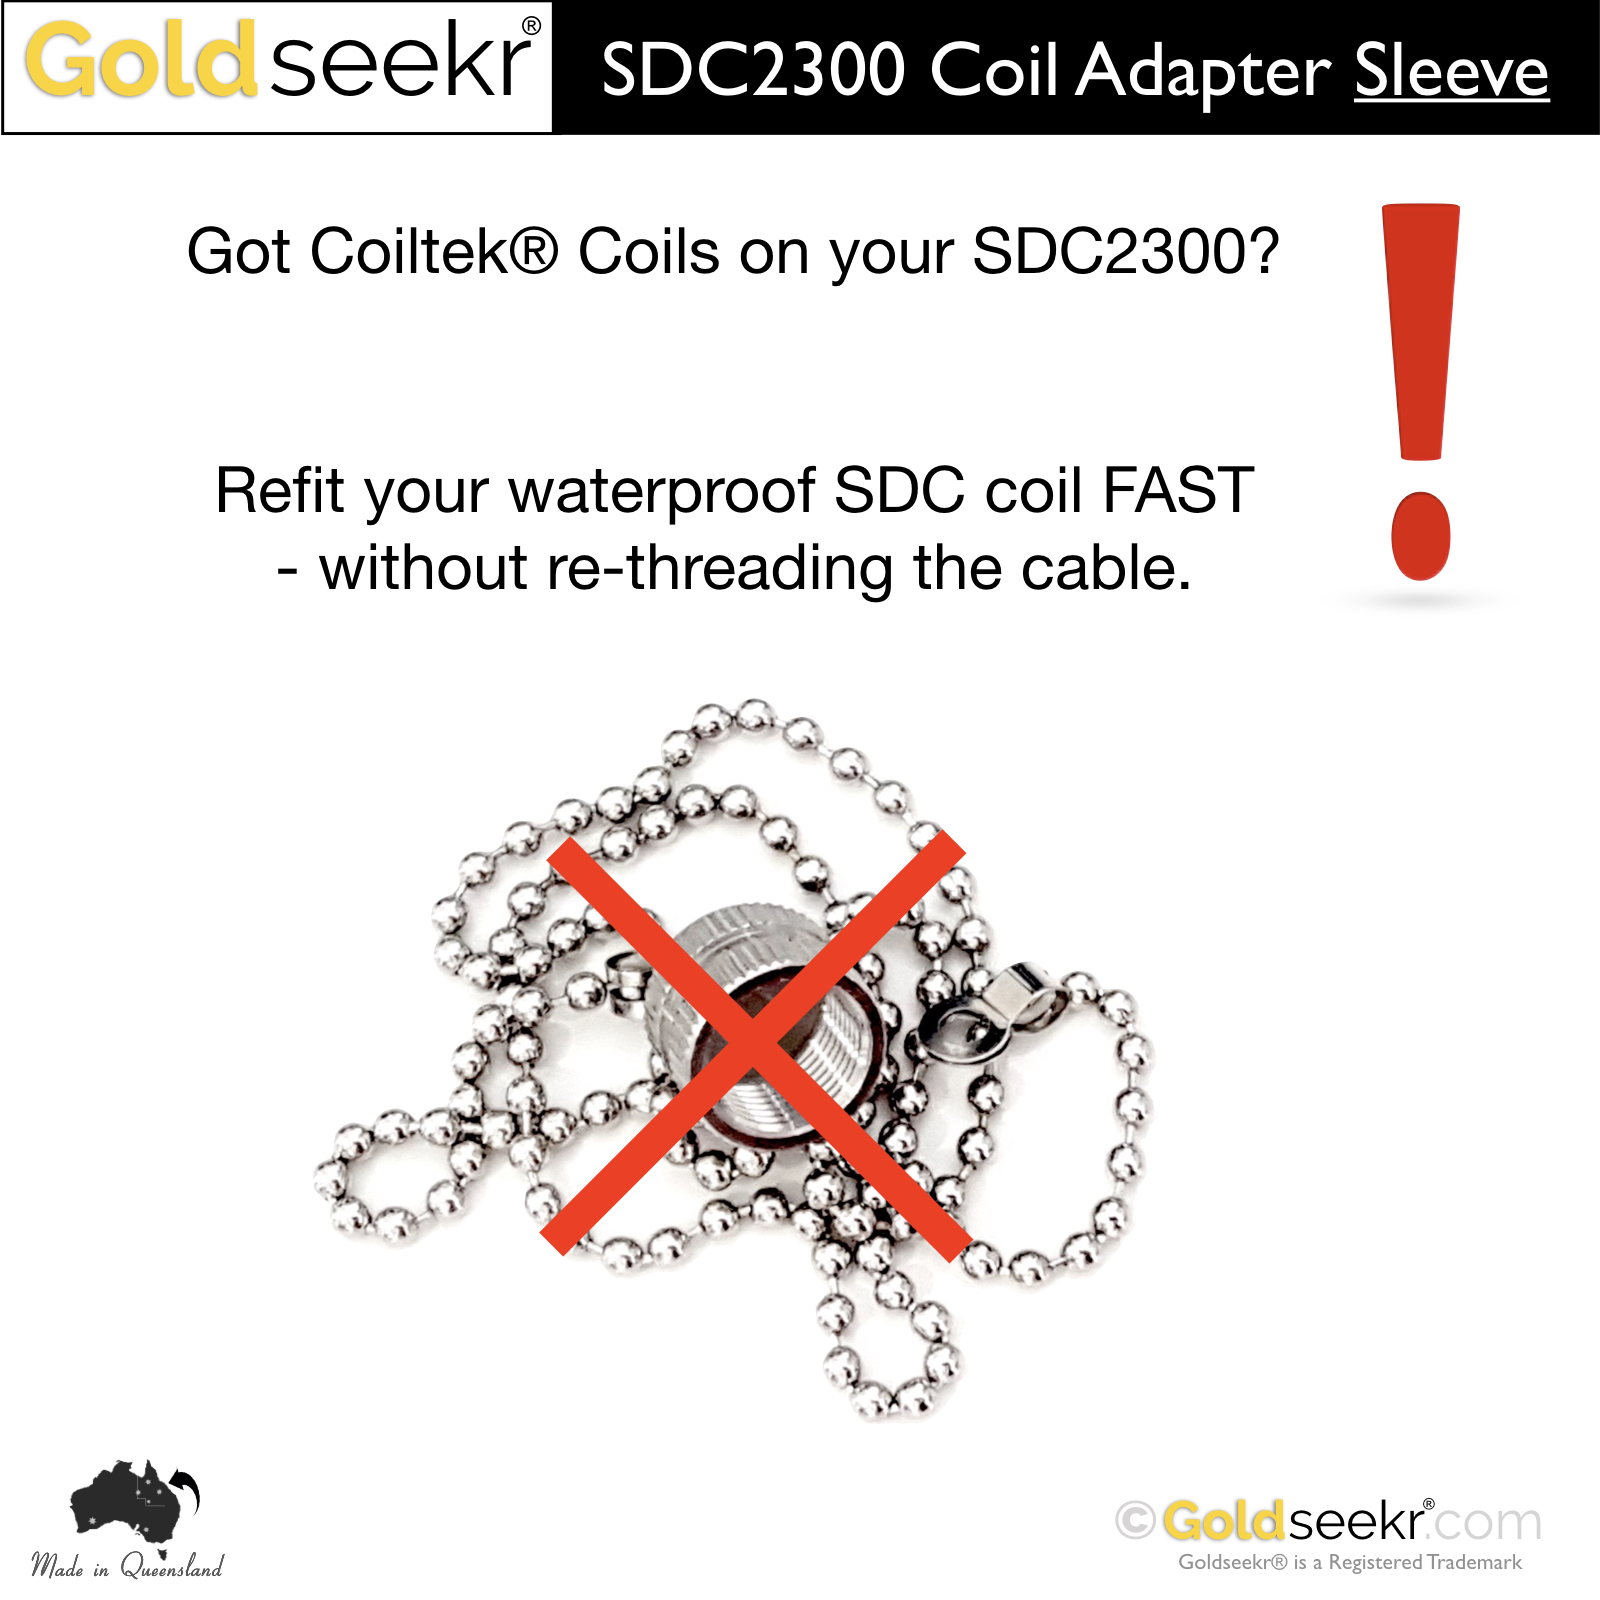 COIL ADAPTER SLEEVE – suits Minelab SDC2300 with coiltek coils